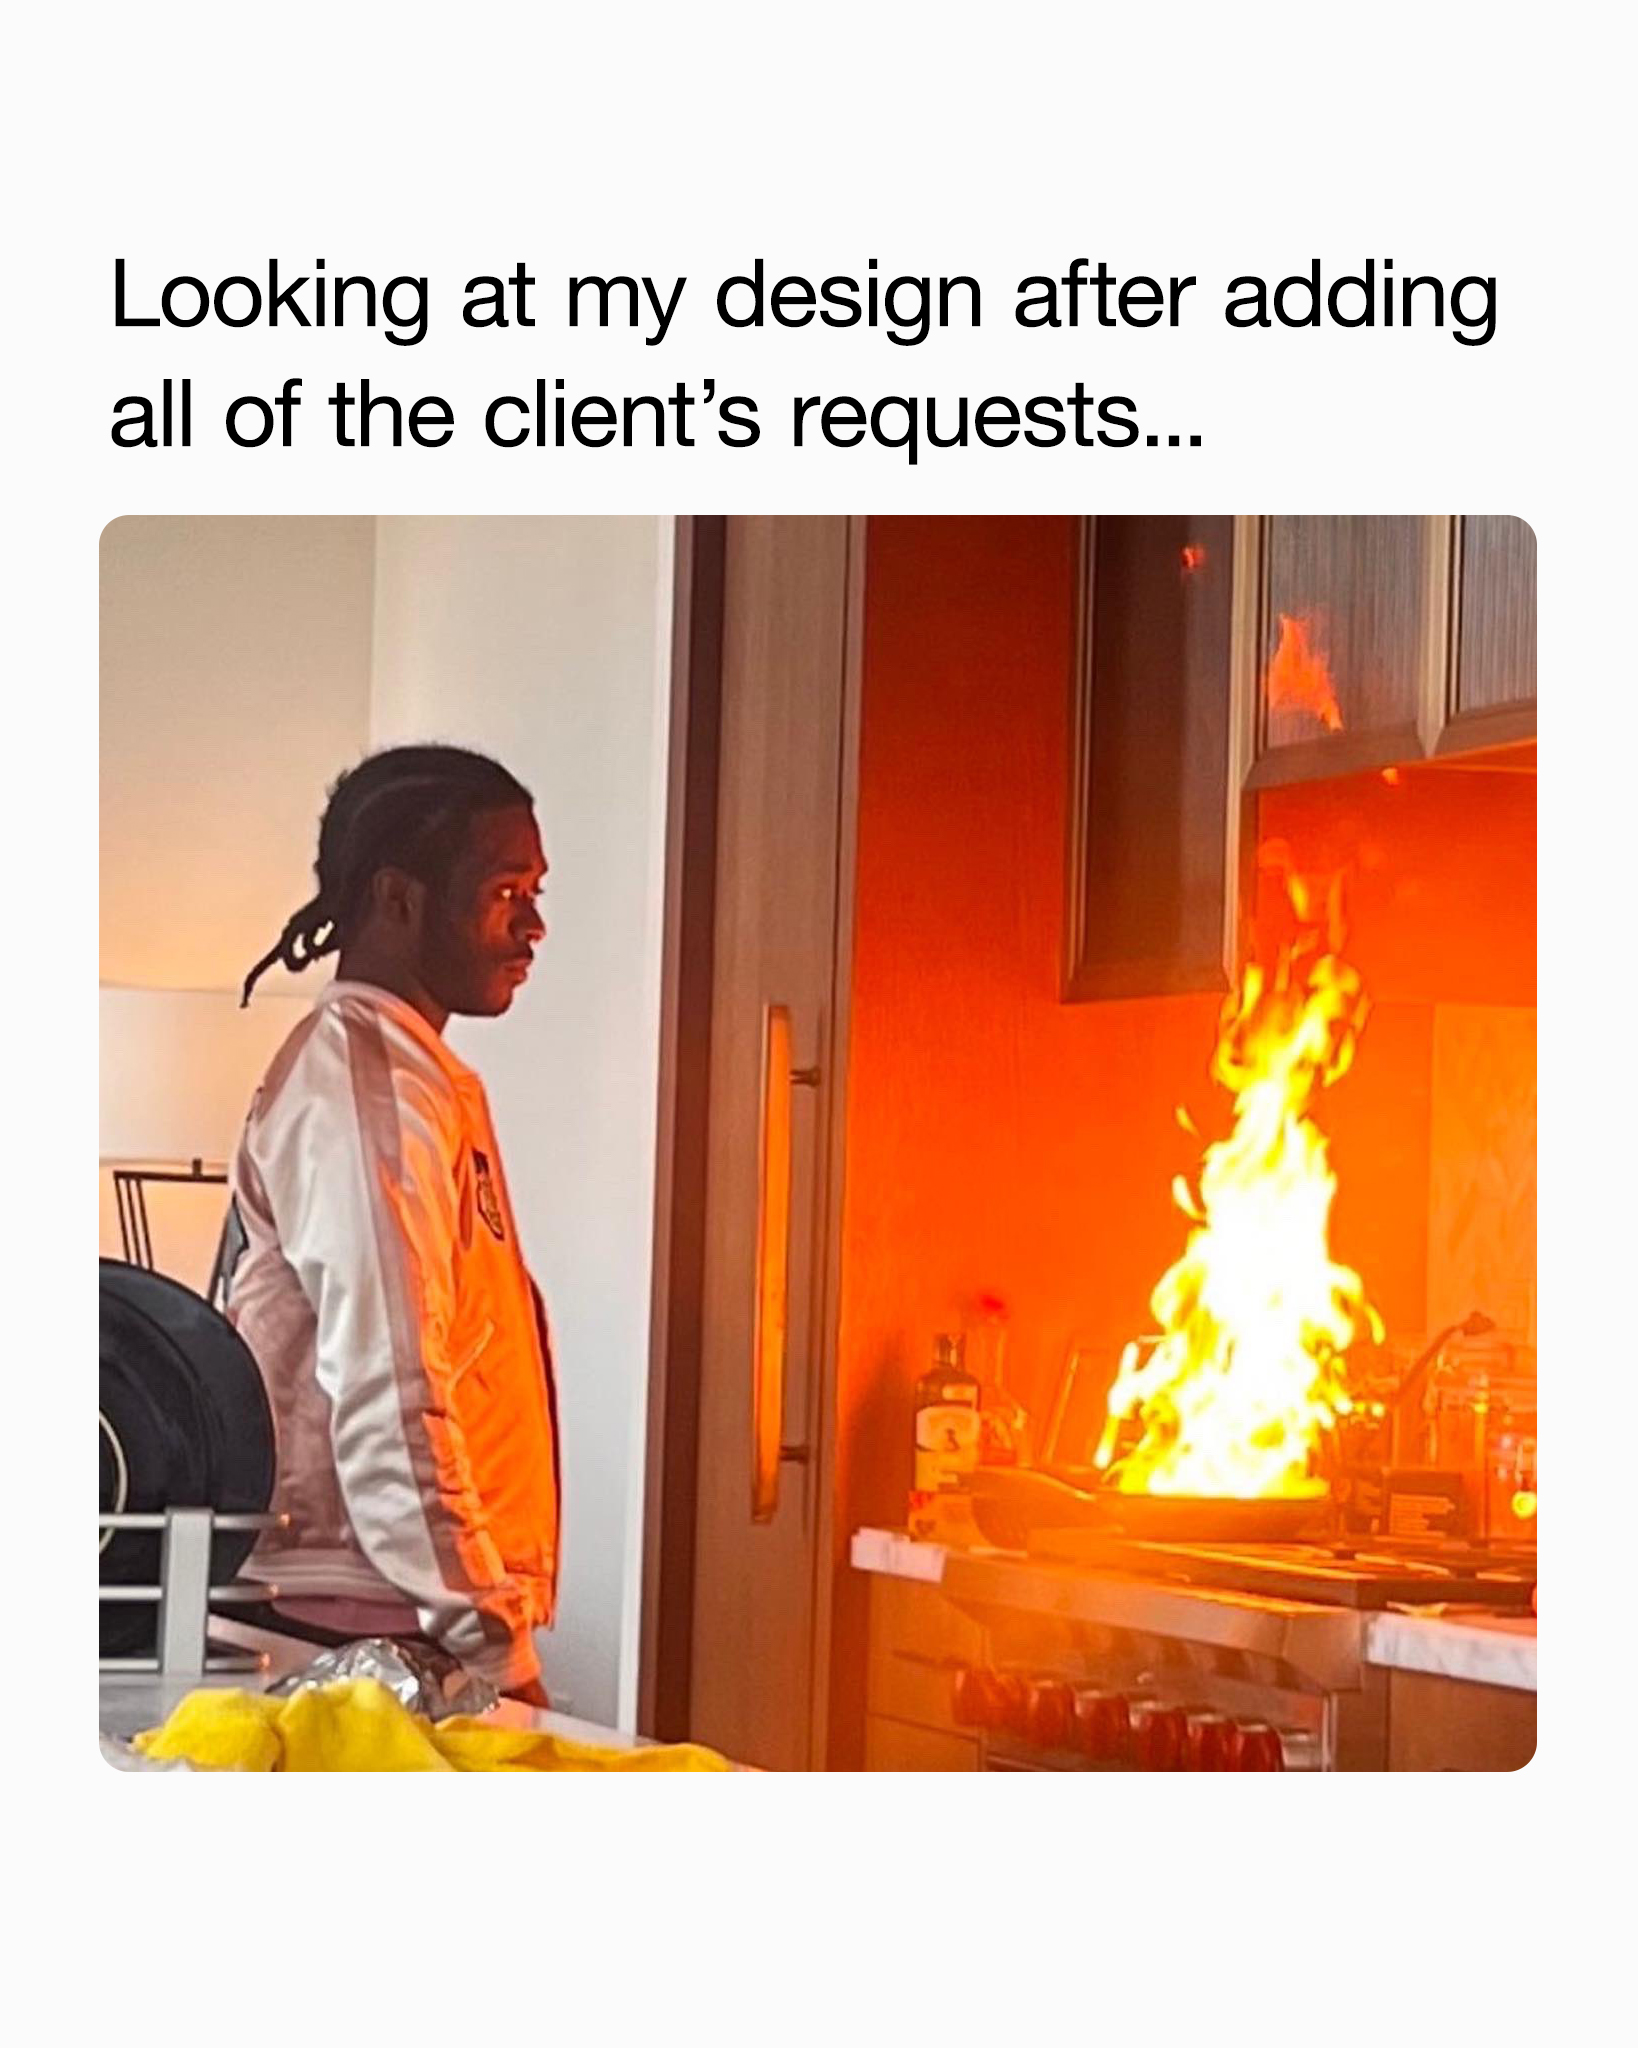 Looking at my design after adding all of the client's requests...